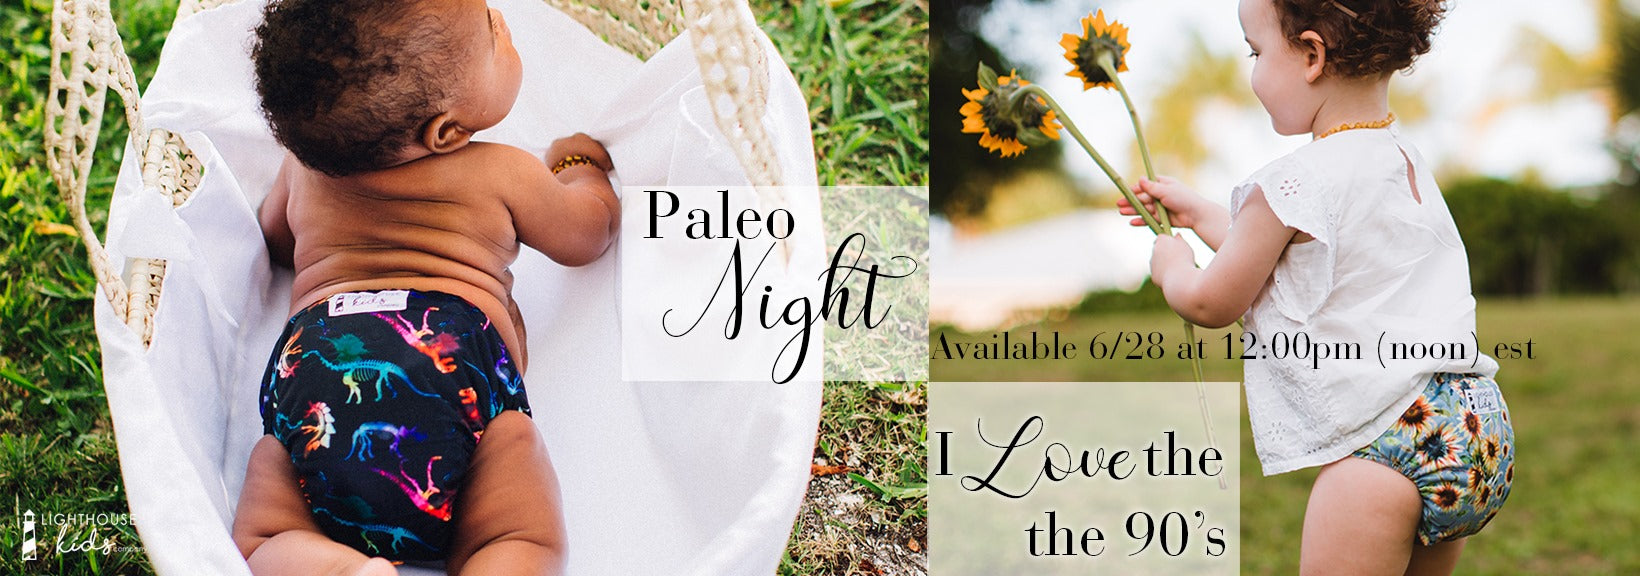 Lighthouse Kids Co - Paleo Night & I Love the 90s Sunflower - New Releases Friday